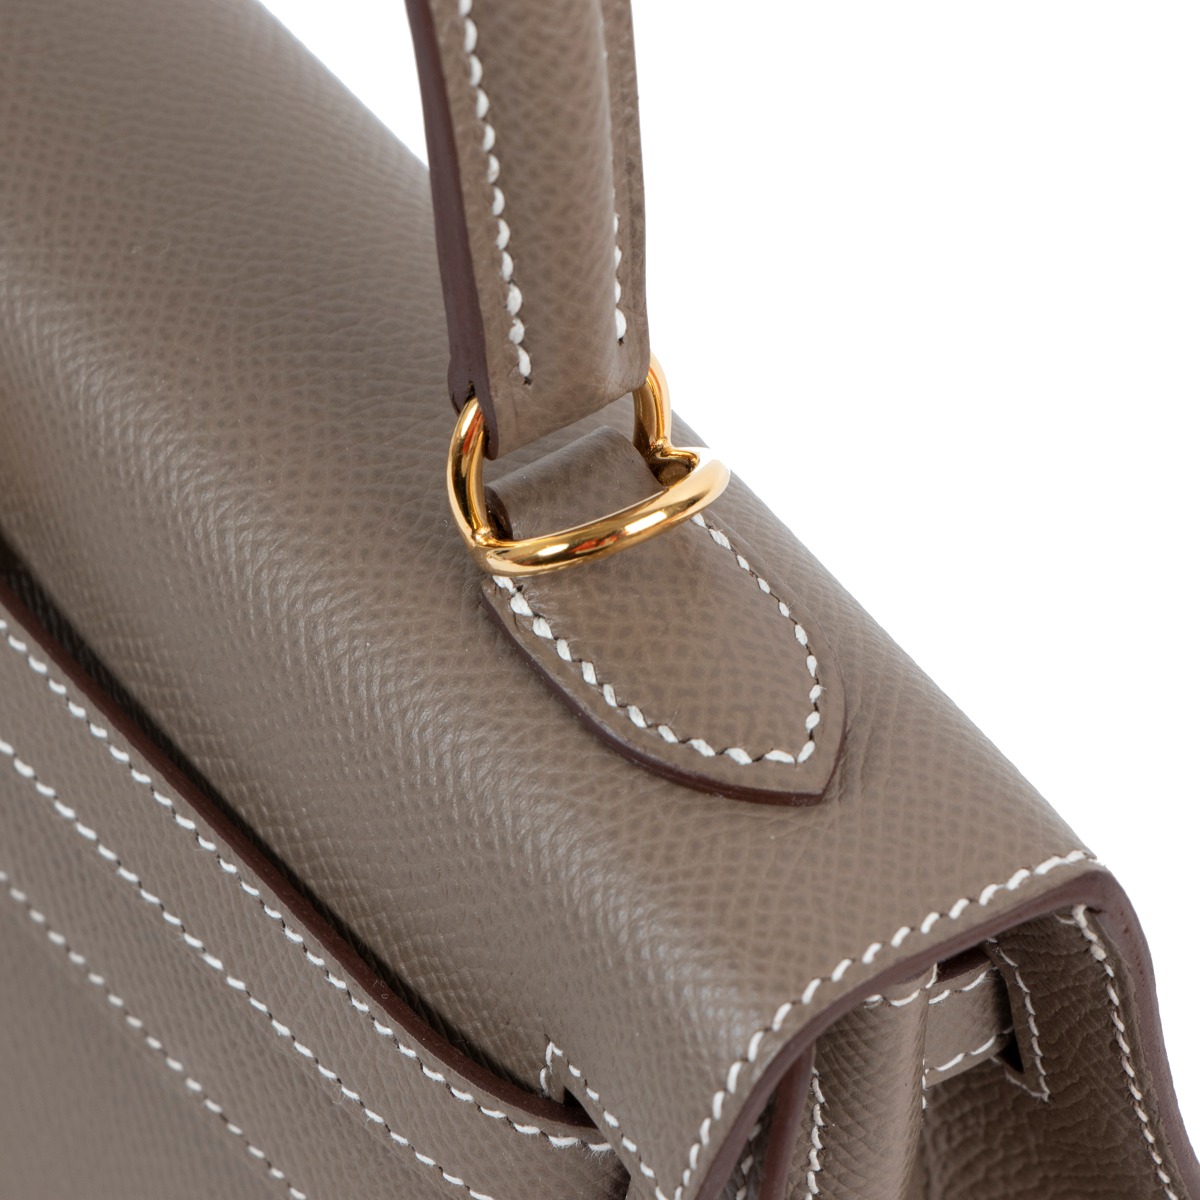 Hermès Limited Edition Sellier Kelly 25 Etoupe, Alezan & Biscuit Epsom